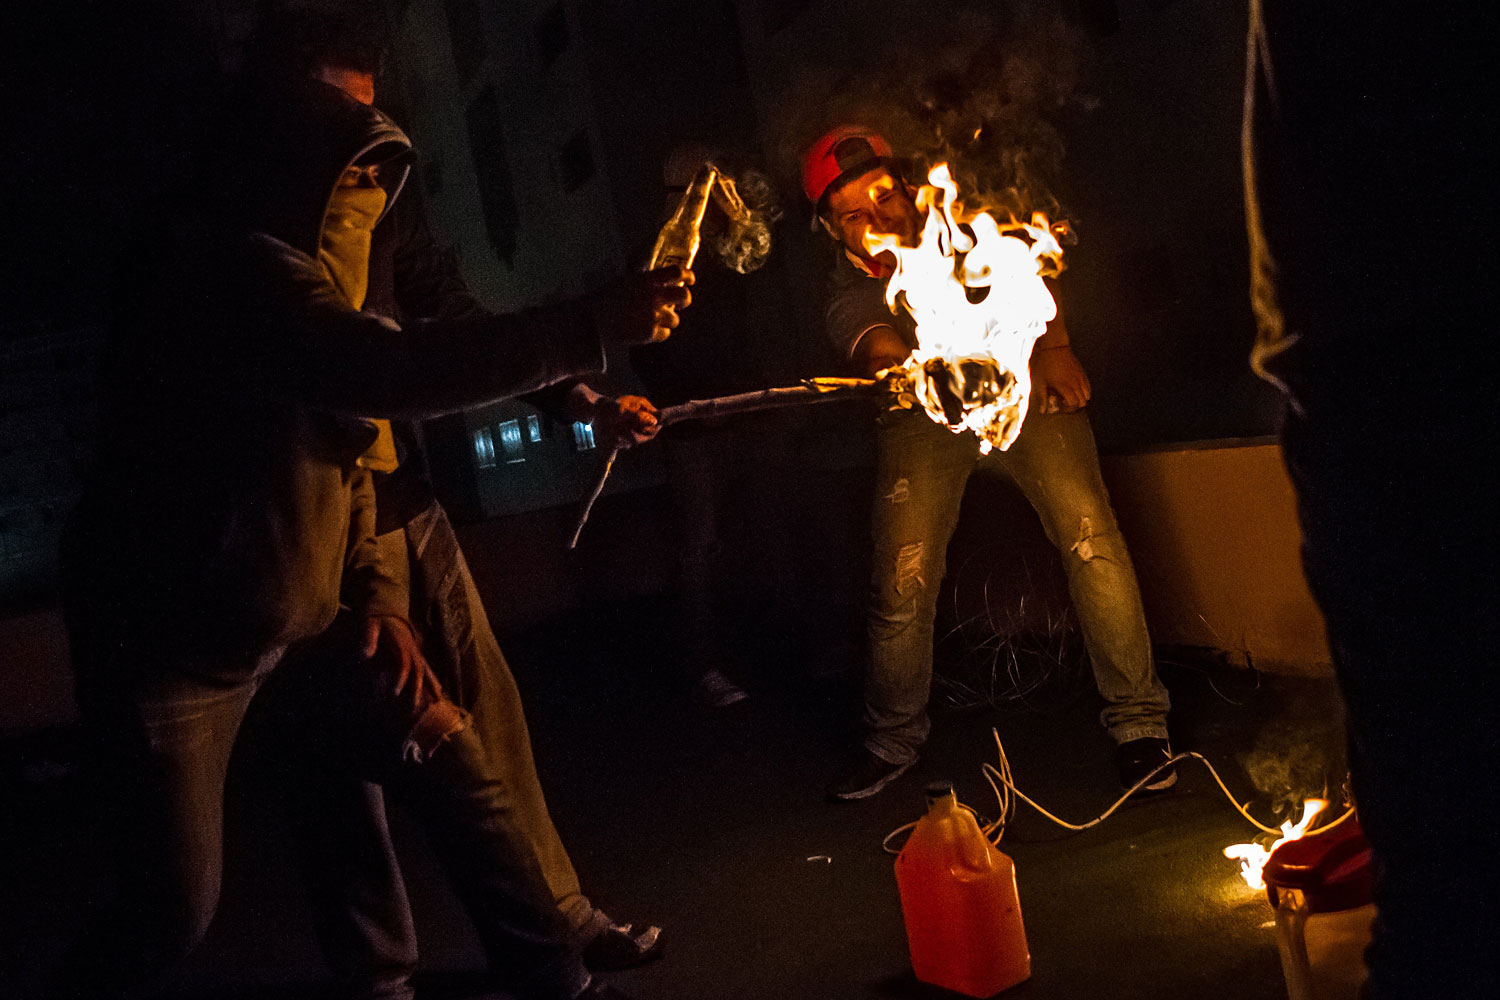 Protesters on a rooftop light Molotov cocktails to throw at police below in San Cristobal, Venezuela, in the pre-dawn hours of Feb. 24, 2014.